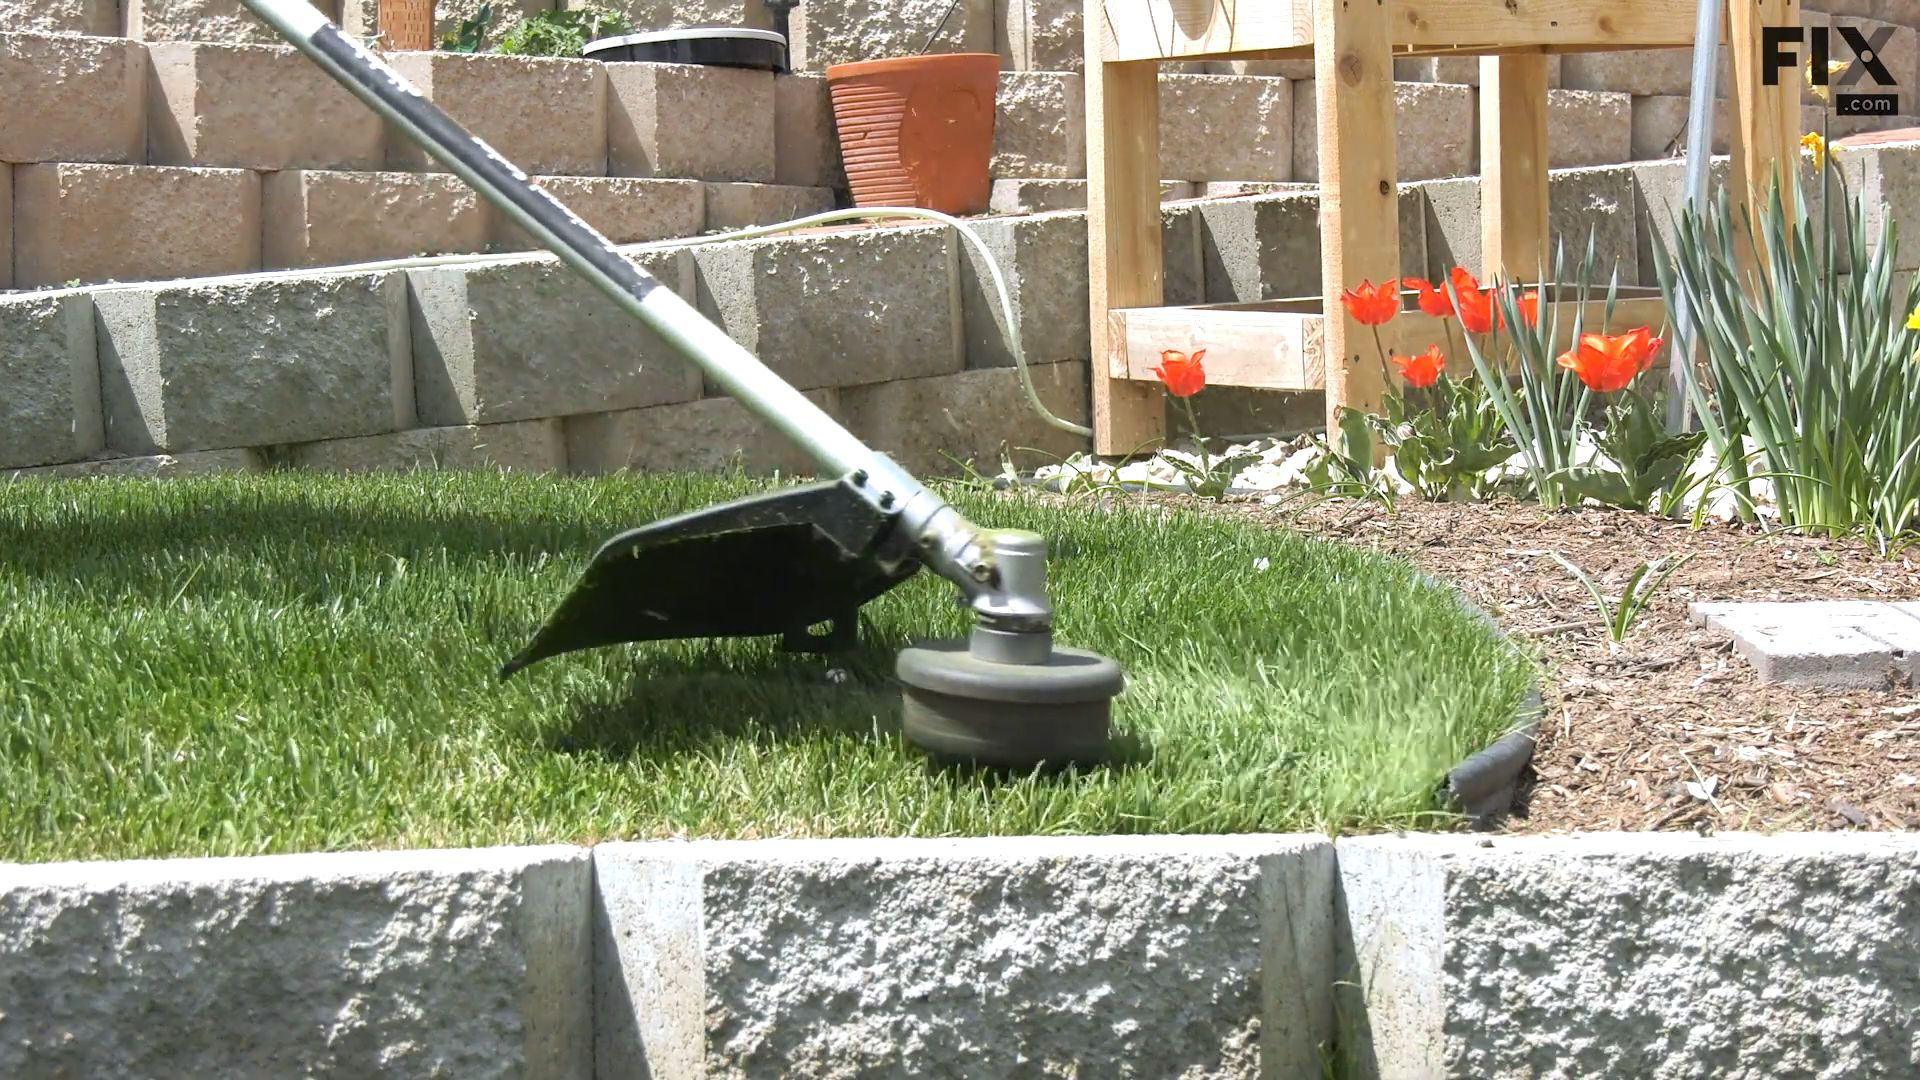 A gas-powered, straight-shaft string trimmer being used to cut grass on a tightly curved section of a backyard garden